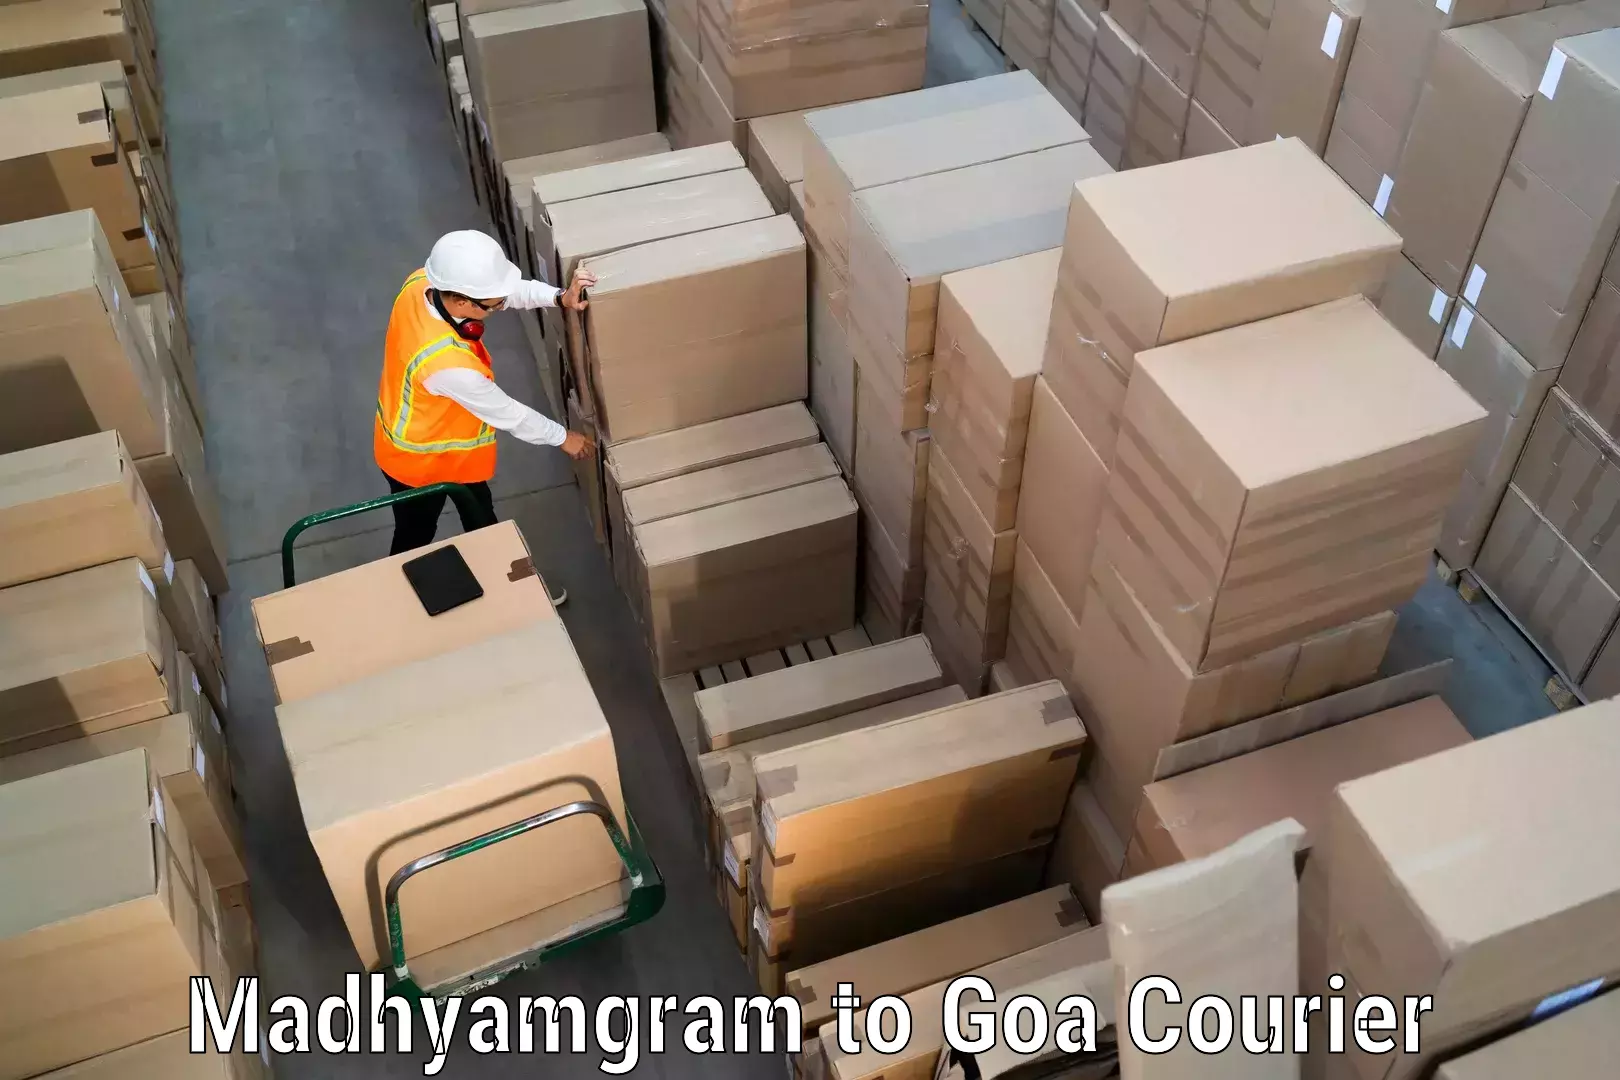 Courier service comparison Madhyamgram to Bardez